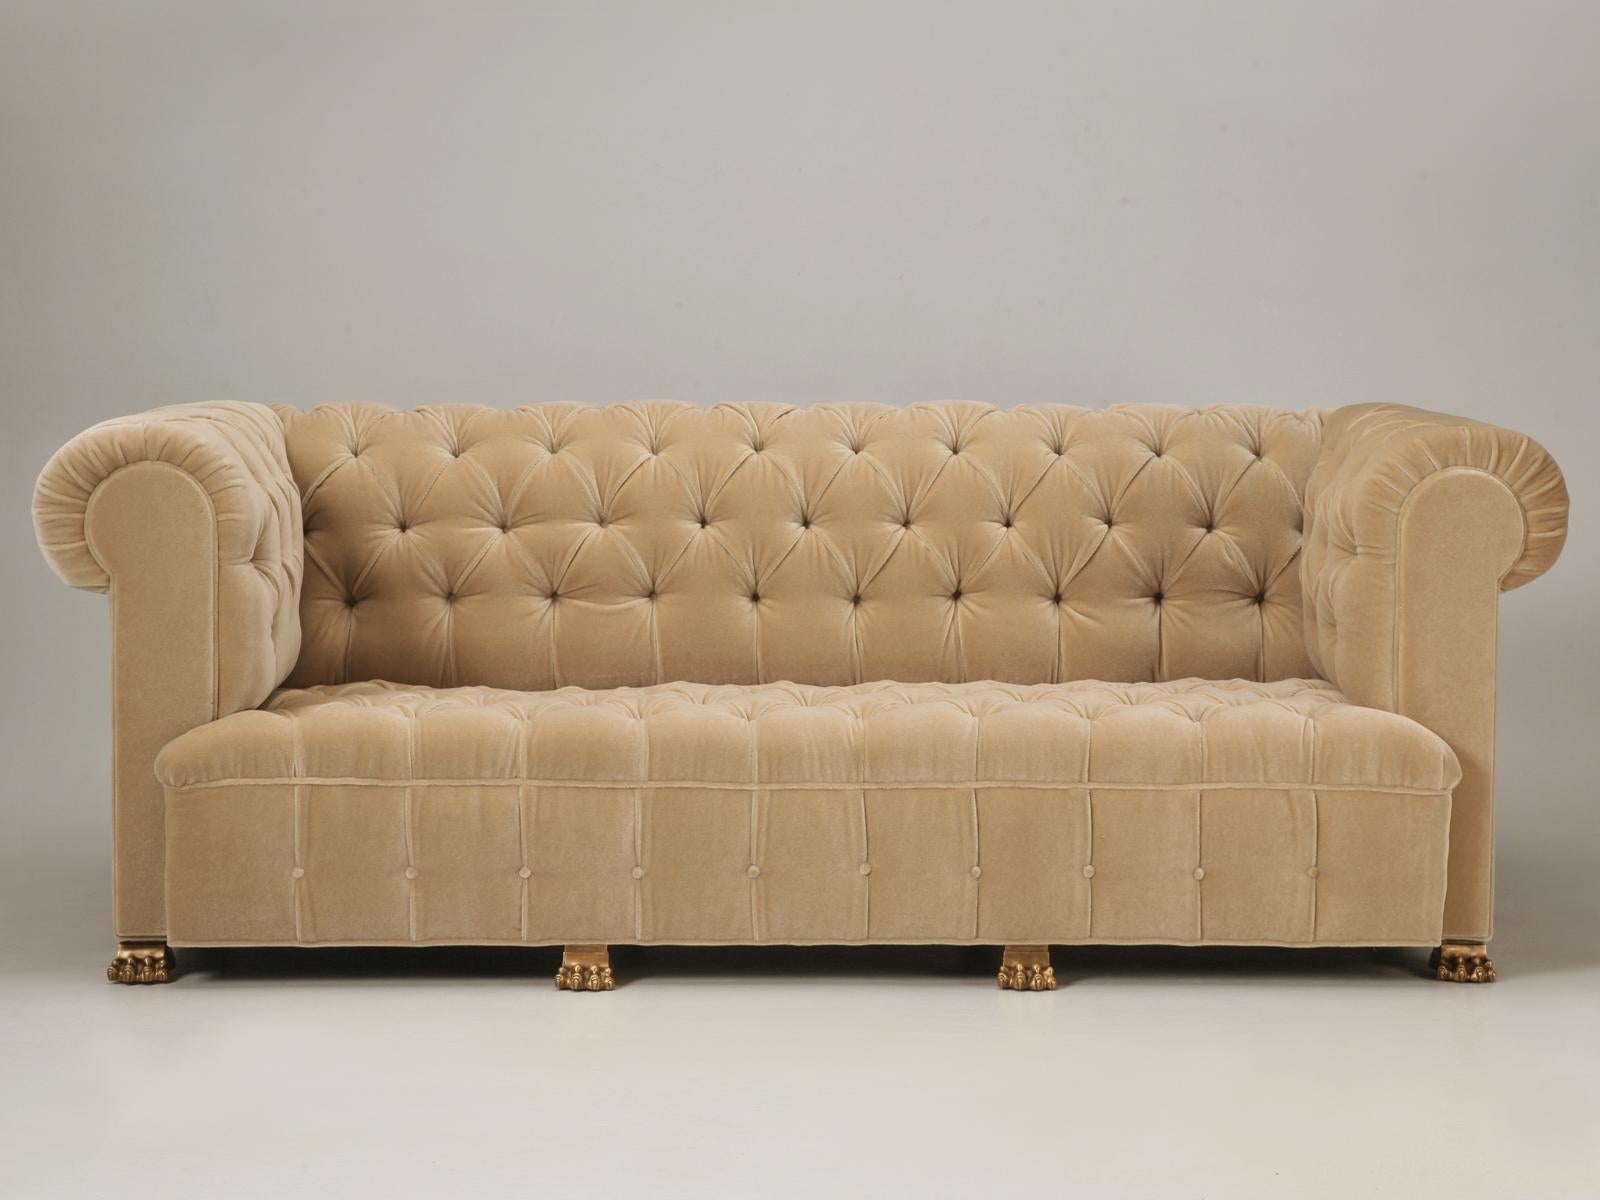 Old Planks interpretation on the Classic chesterfield tufted-back sofa, which we build here in our upholstery department in any dimension you wish. Our wooden frames are hand-built strong enough to hold several of your friends at one time. The